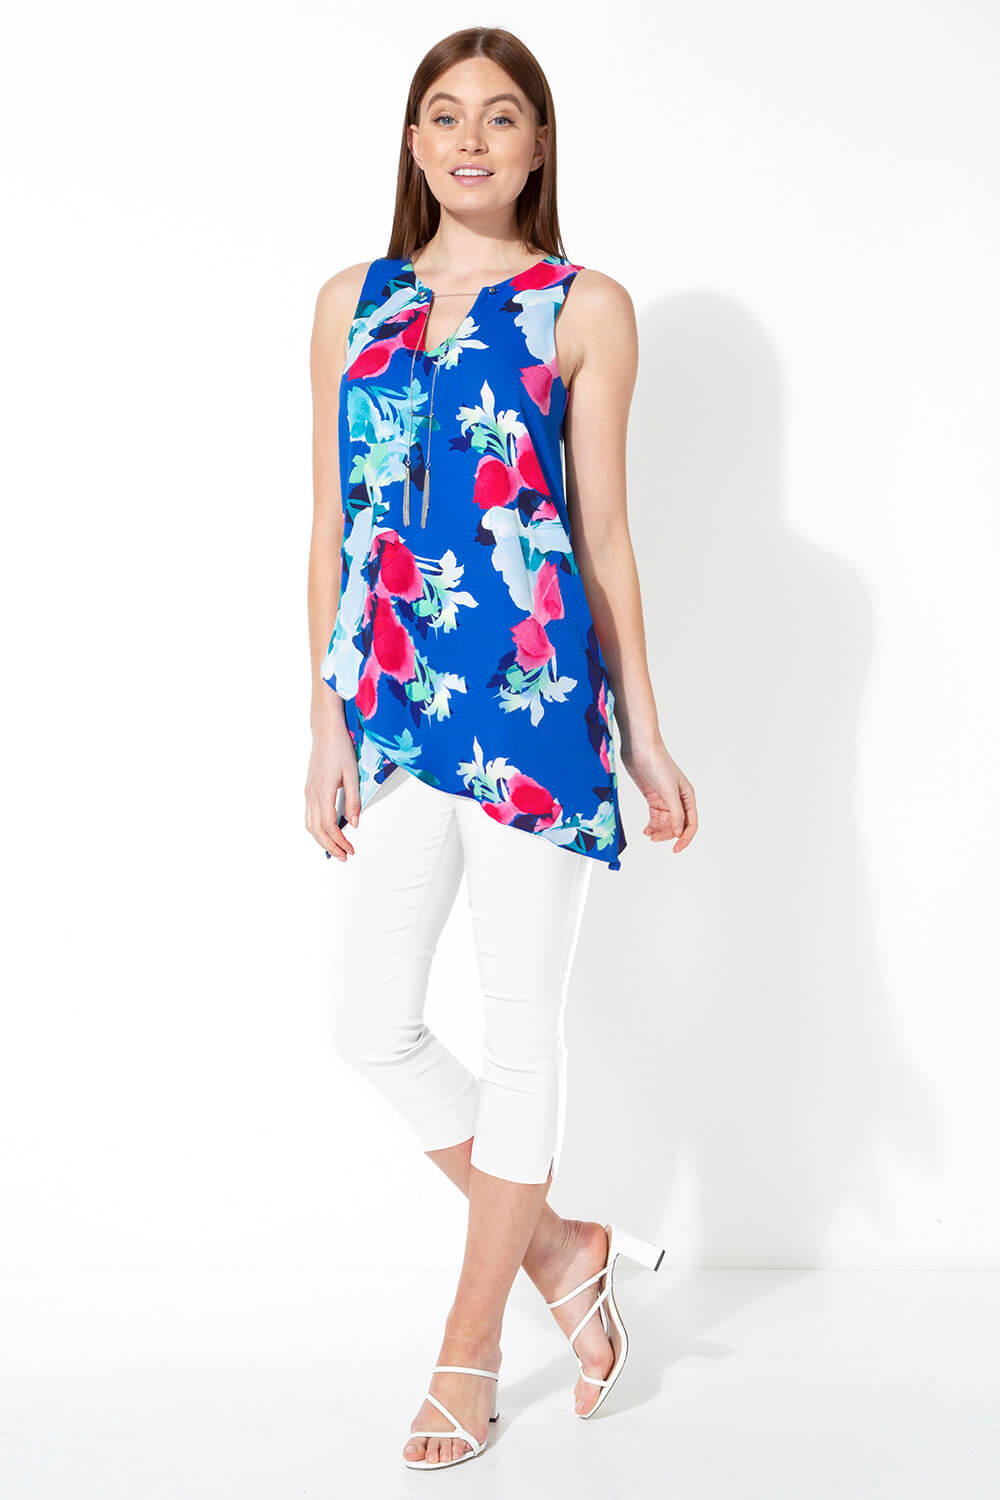 Royal Blue Floral Print Asymmetric Top with Necklace, Image 3 of 5